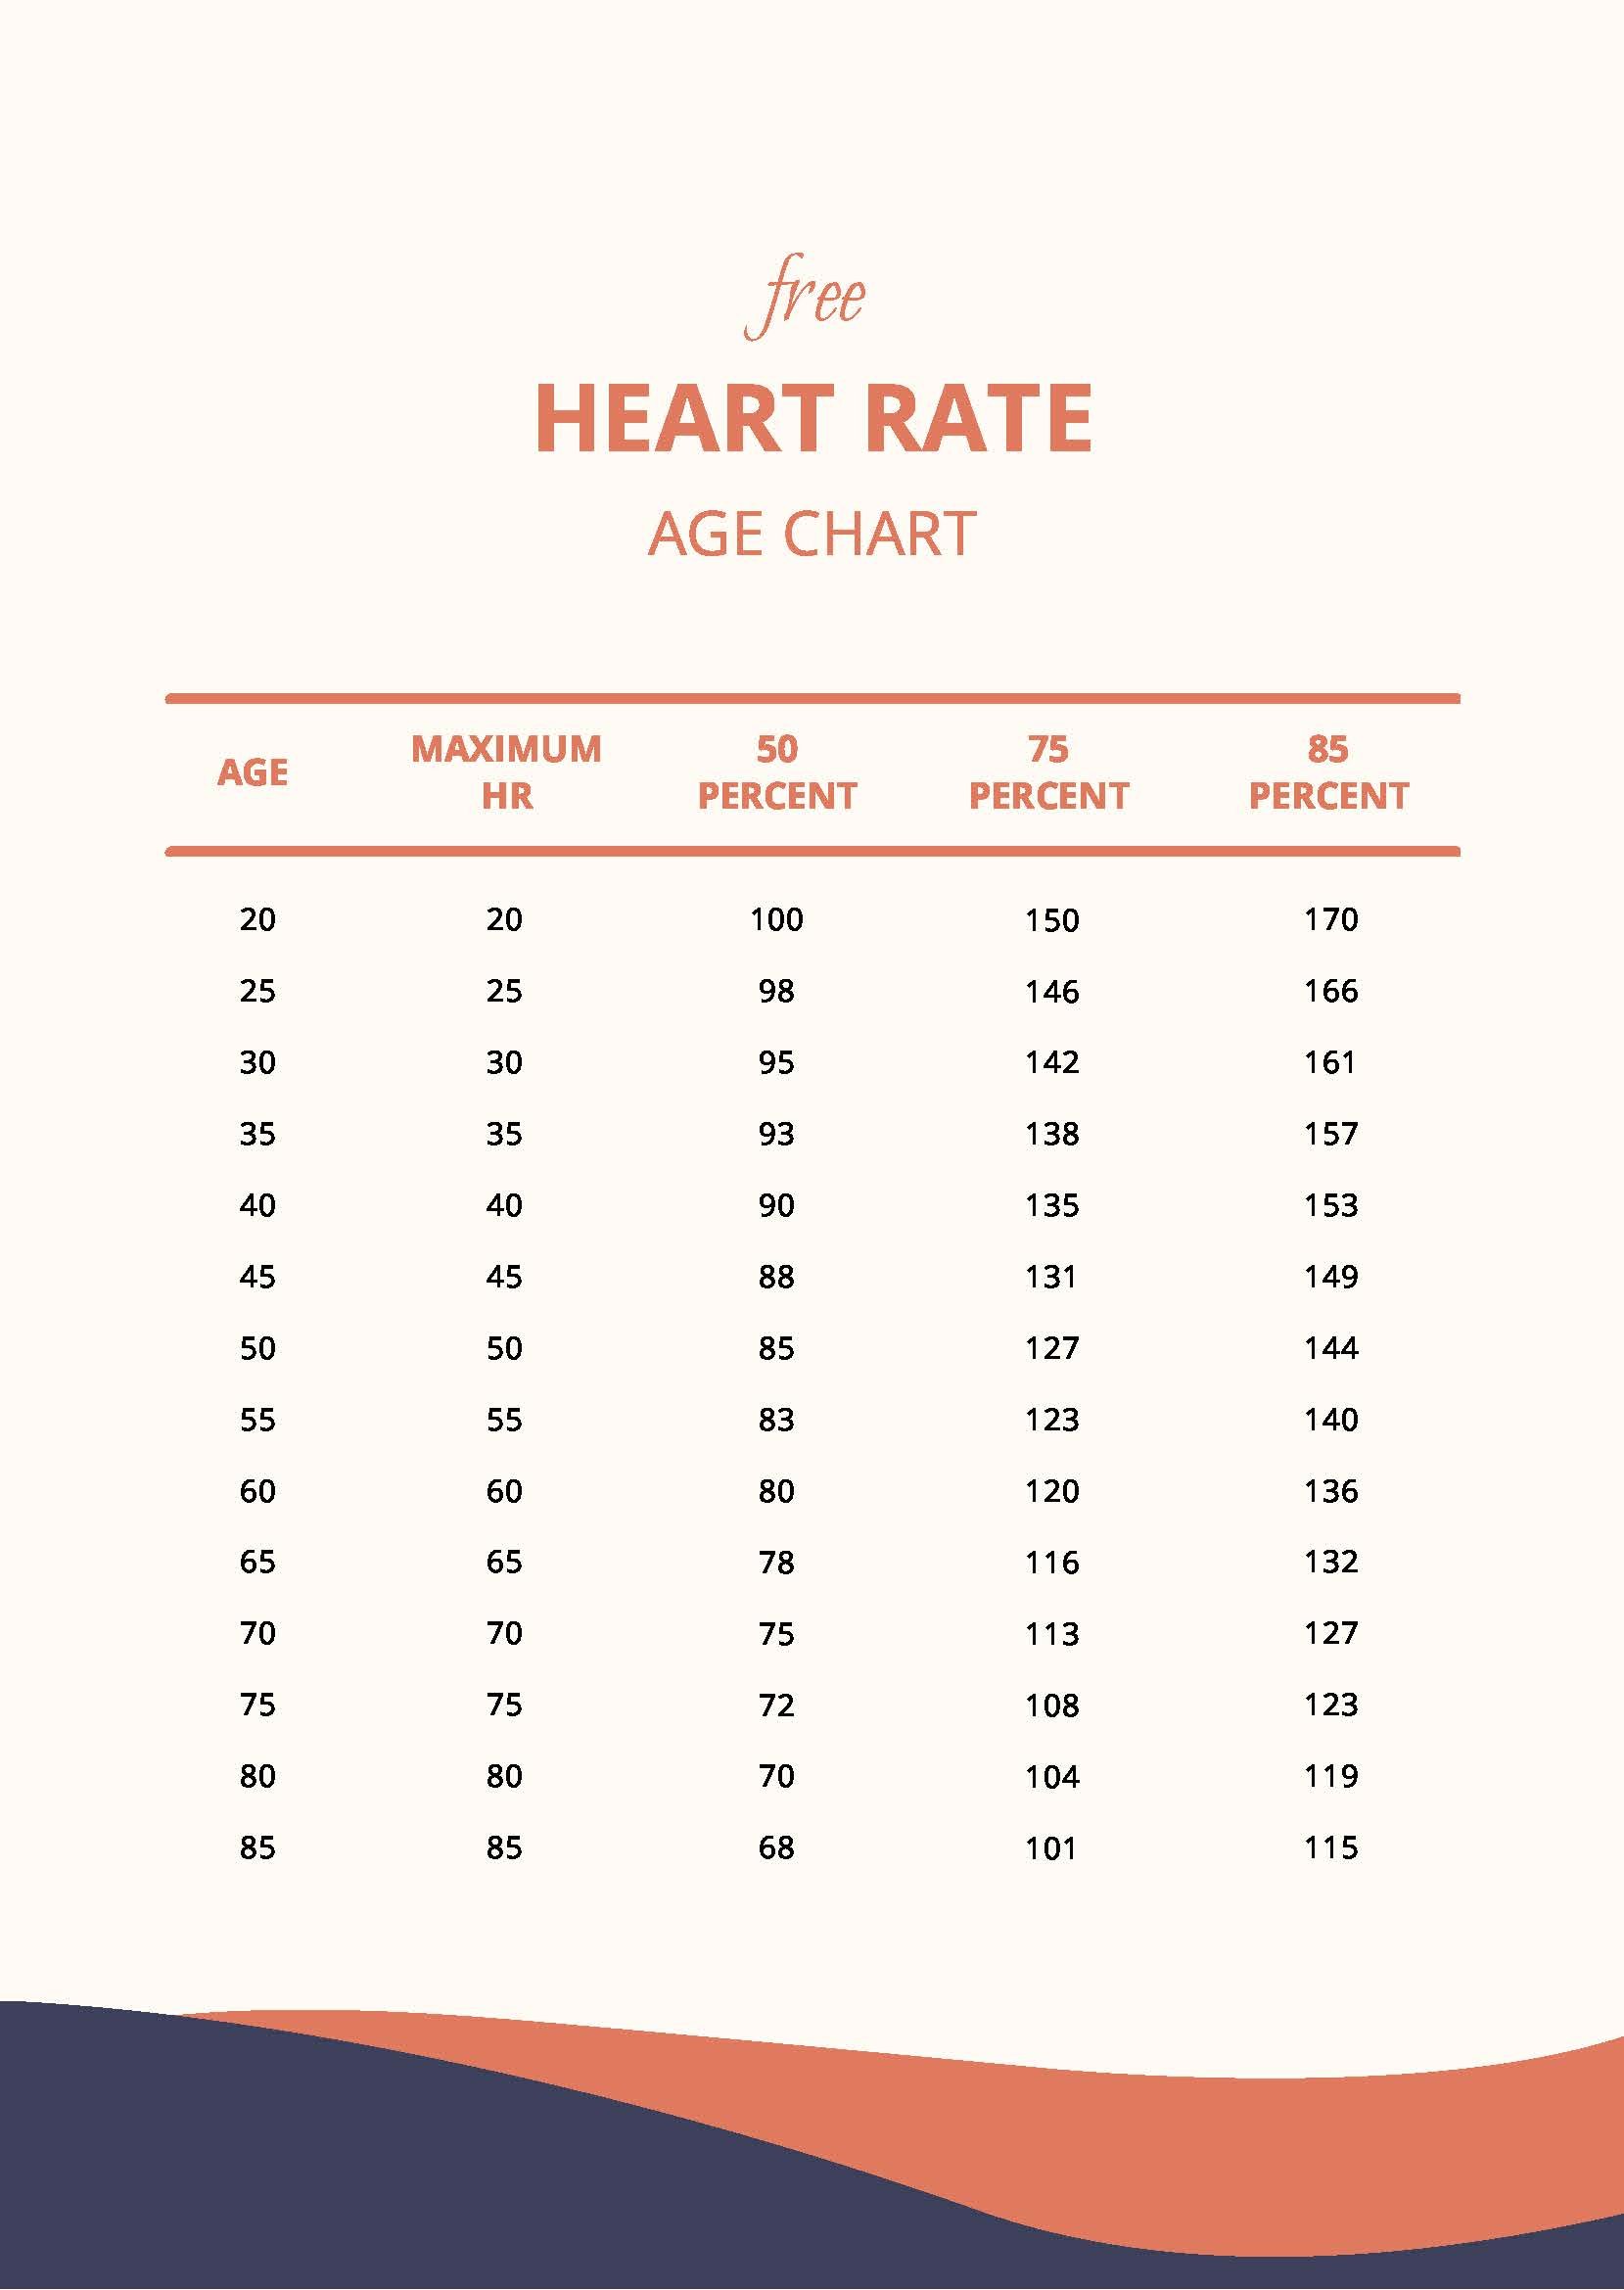 Heart Rate Age Chart in PDF